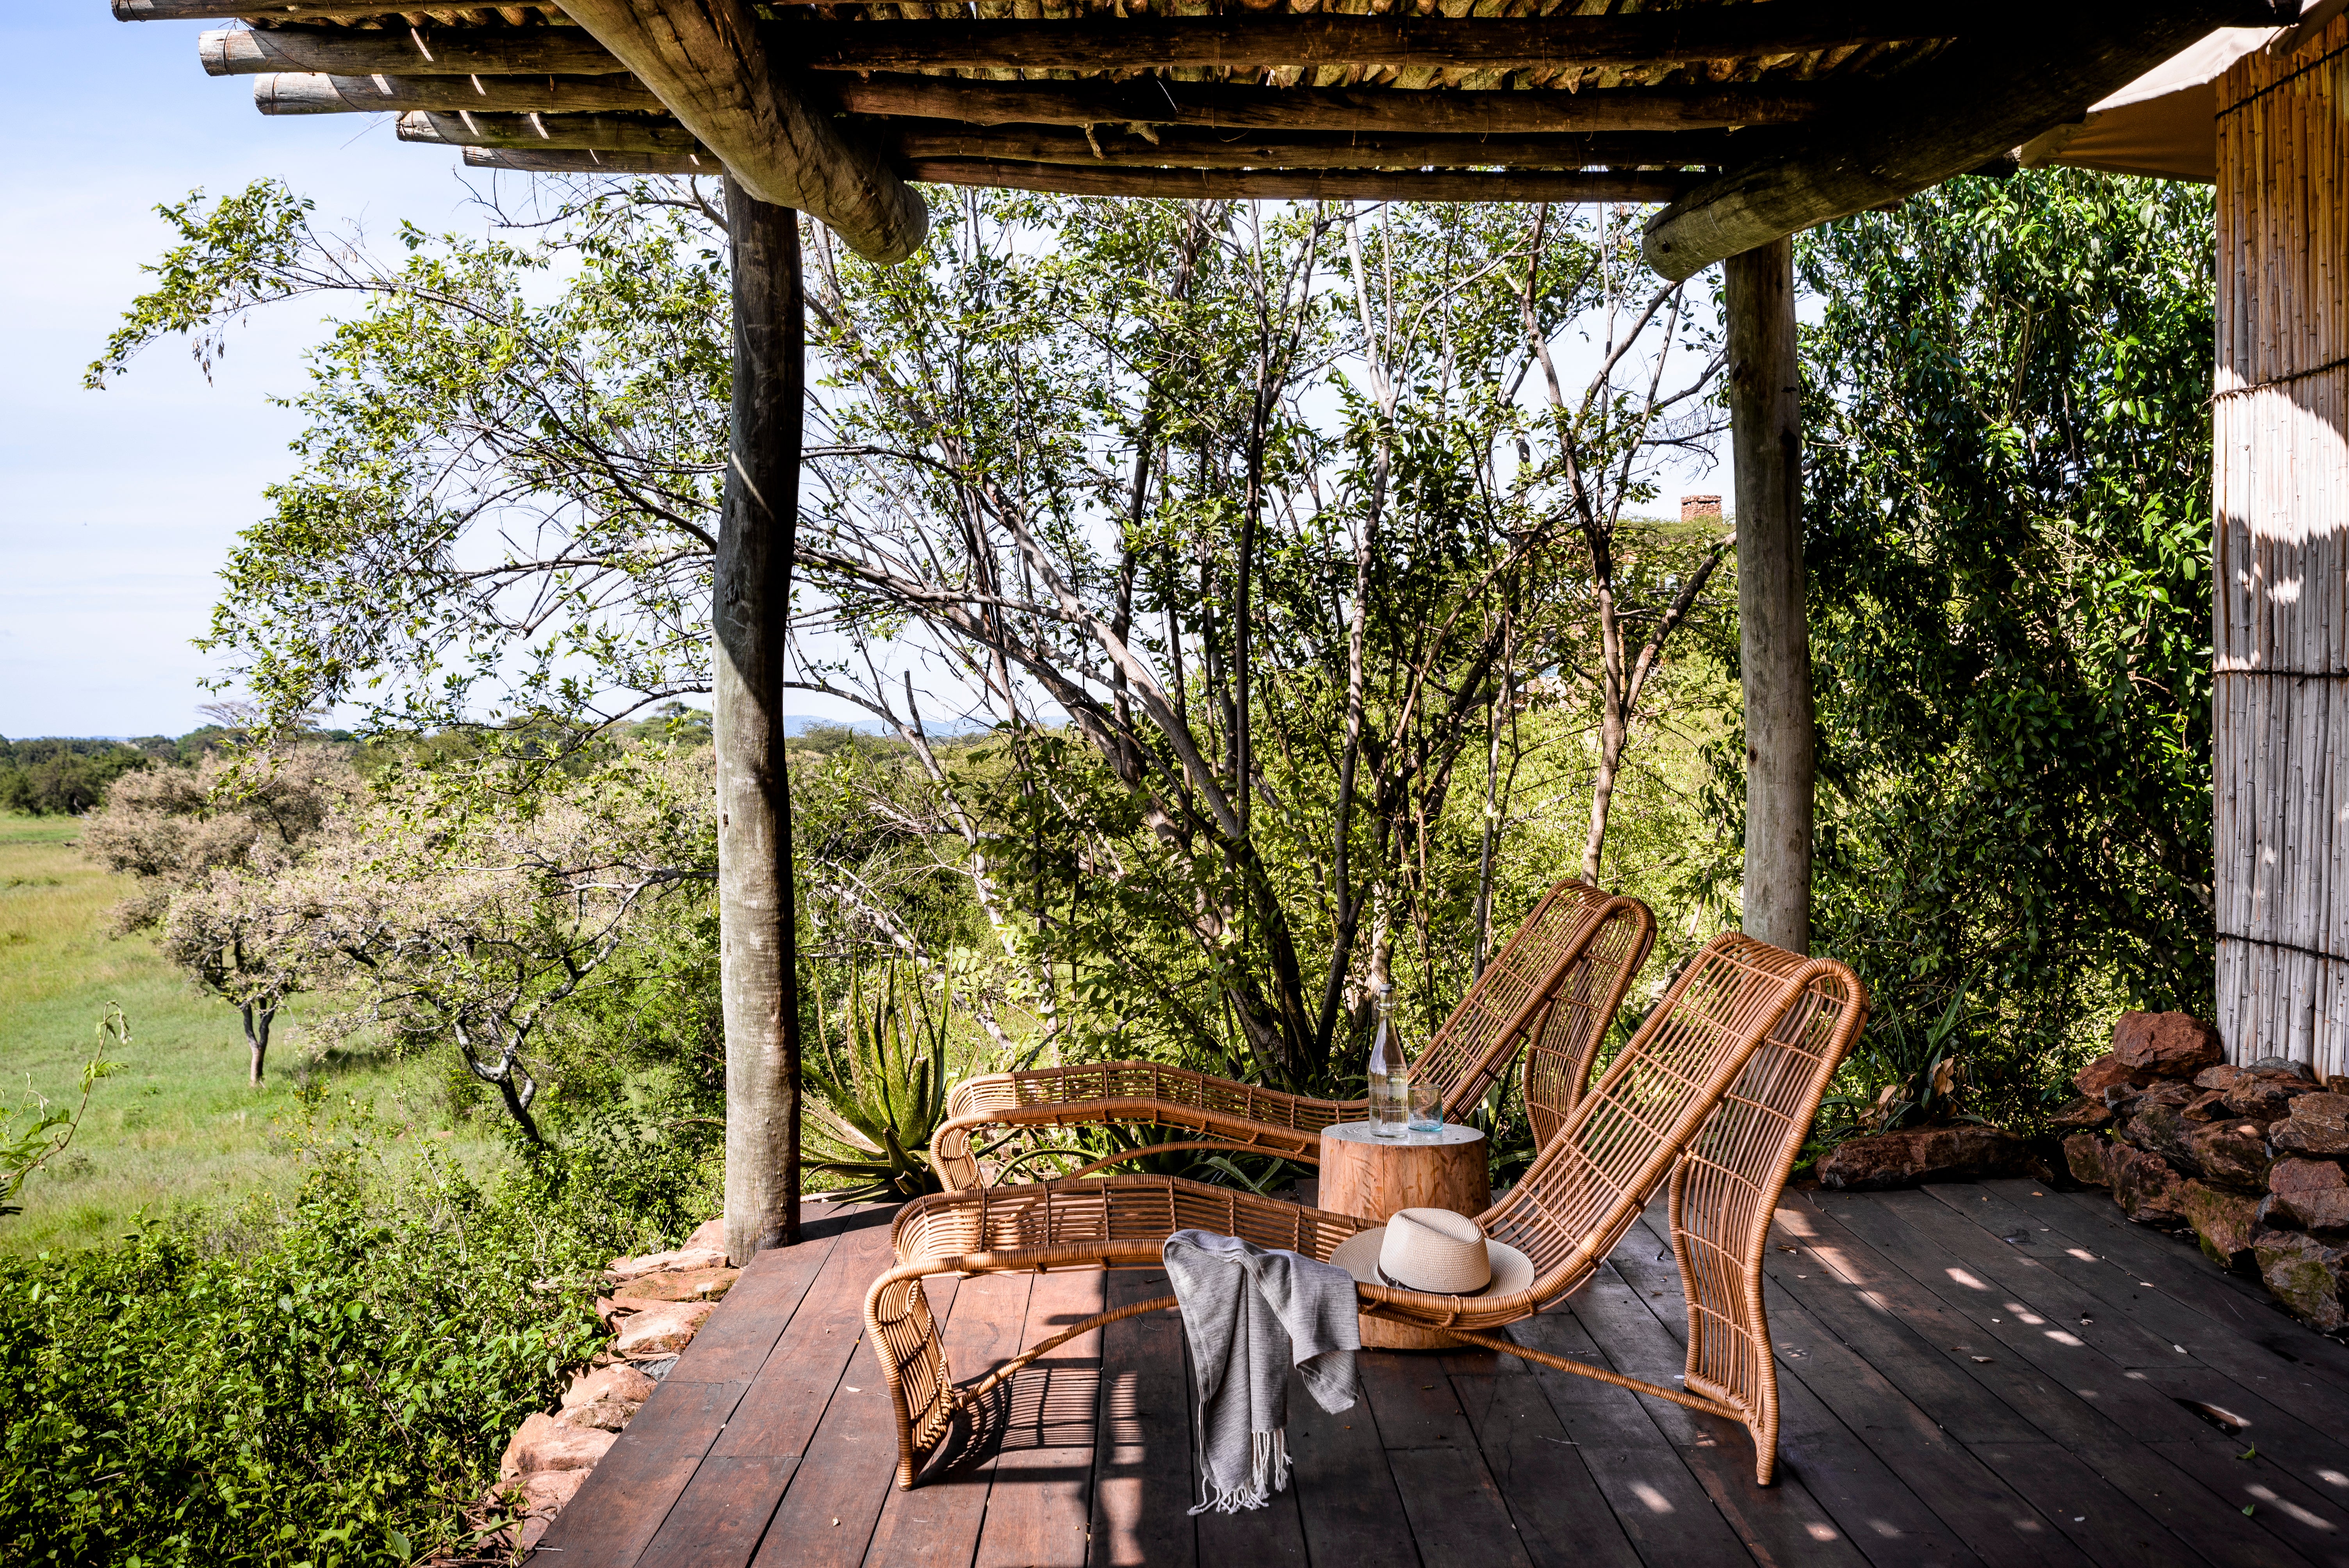 EXCLUSIVE: Idris and Sabrina Elba Honeymooned In Safari Bliss At One Of The World's Best Hotels